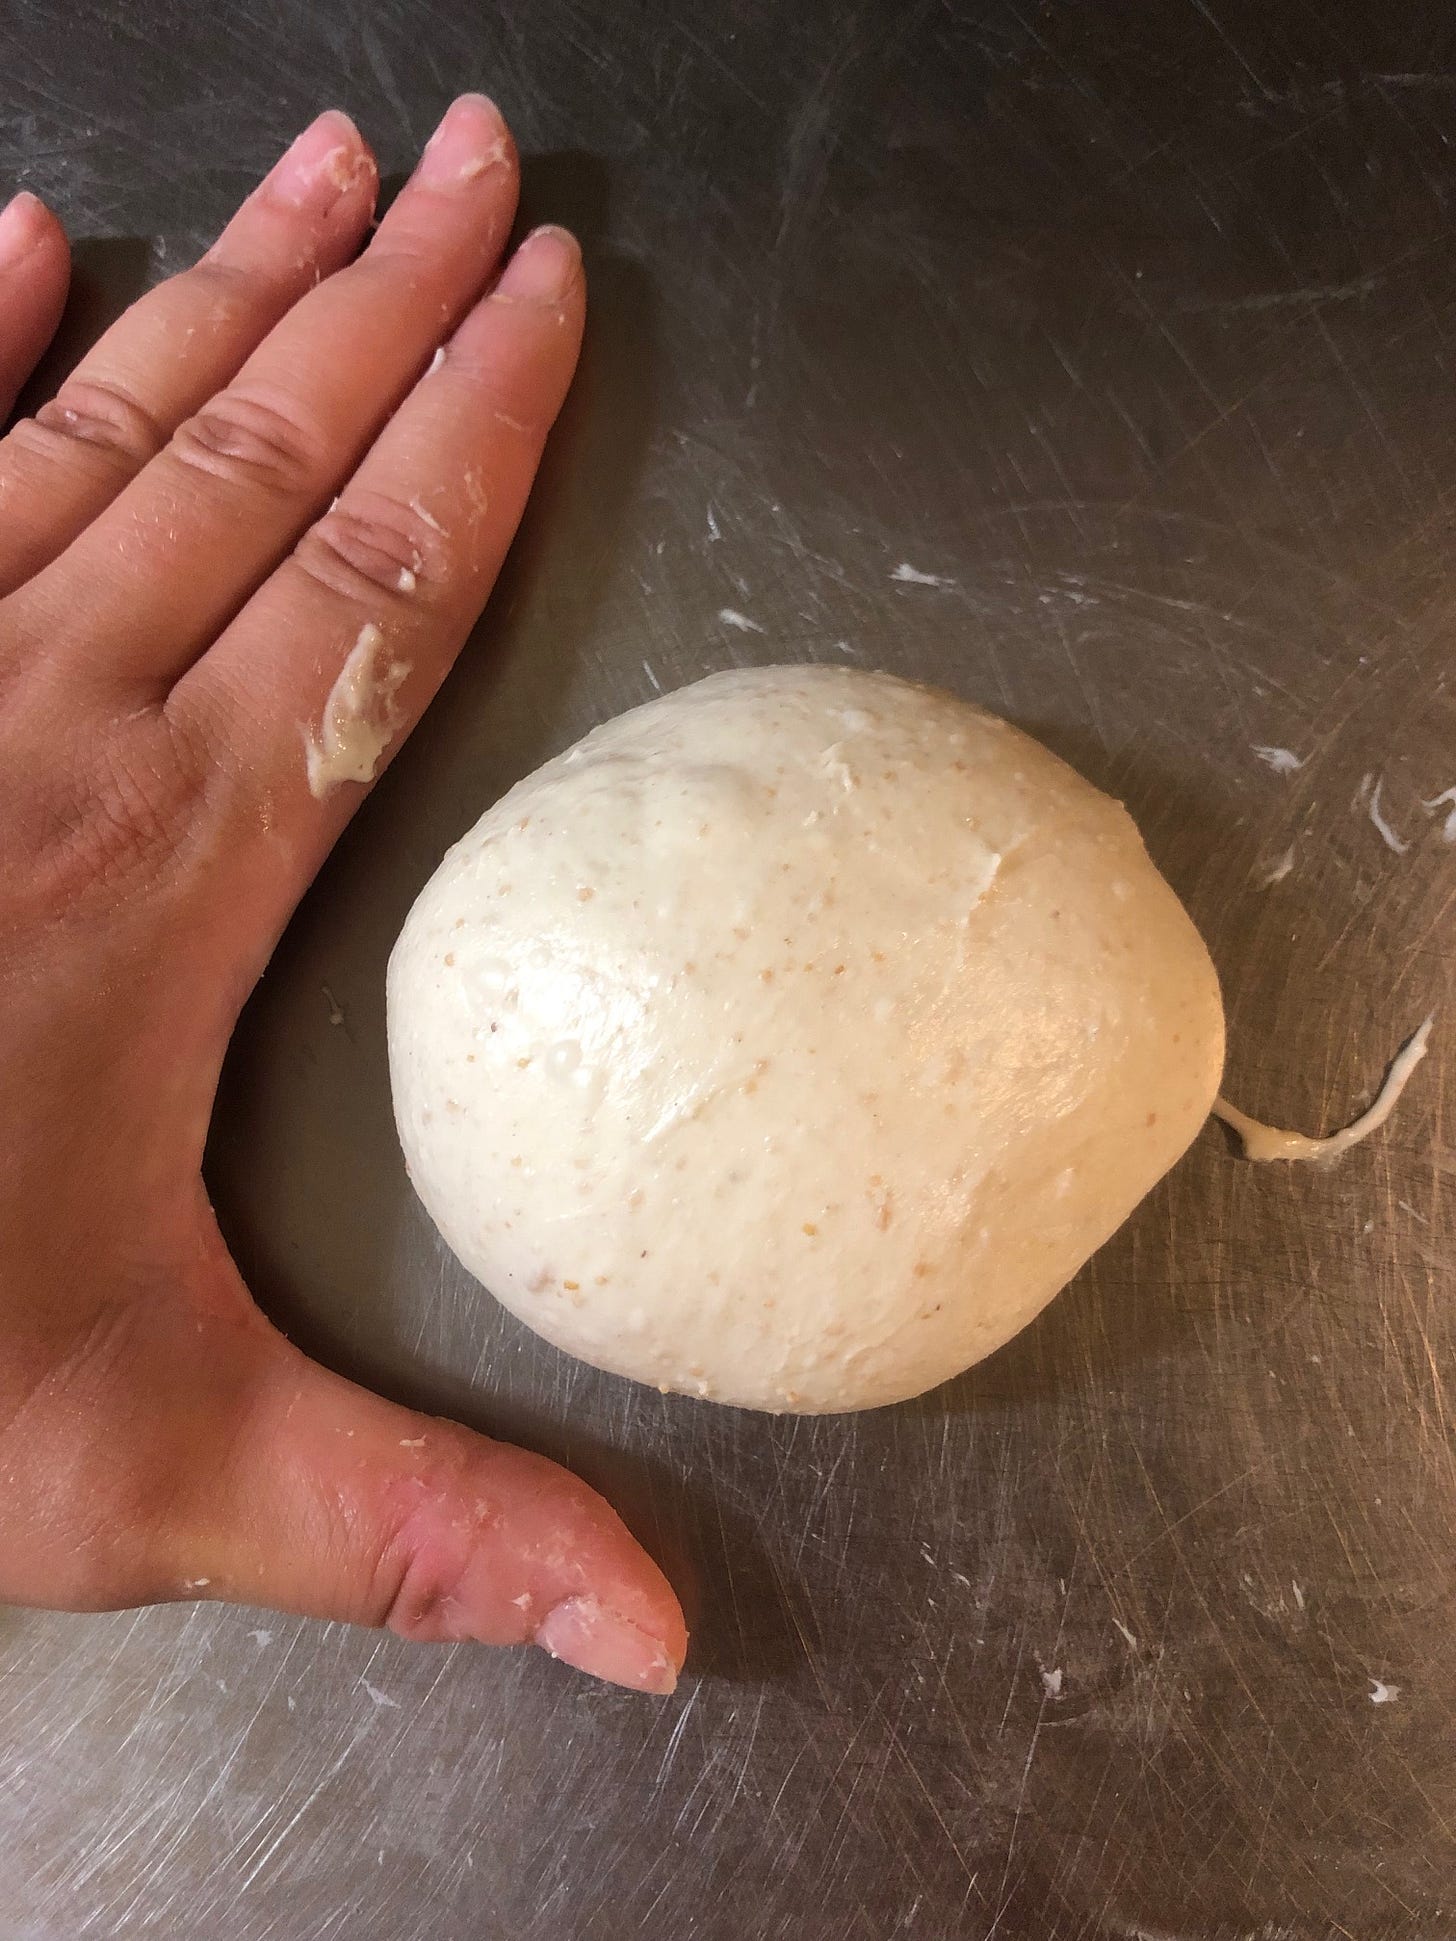 Left hand, palm down, on a metal table, next to a piece of raw dough shaped into a roll.